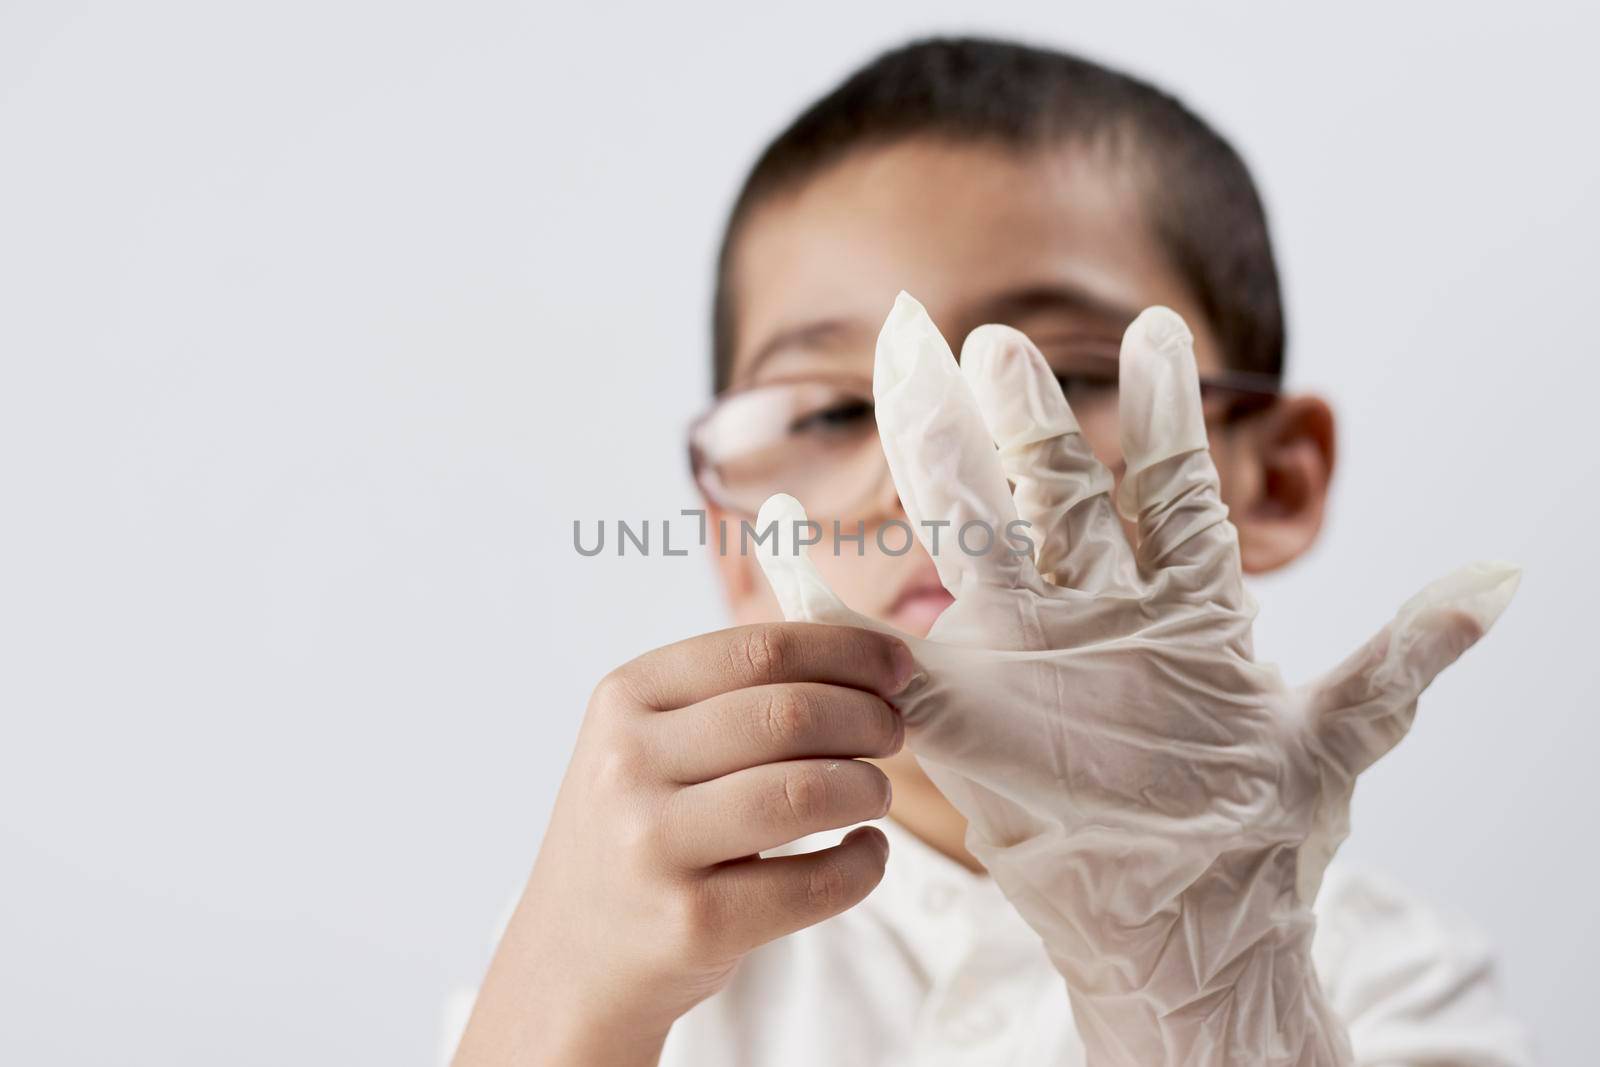 Little scientist kid wearing protective glove before his chemistry experiments with liquids